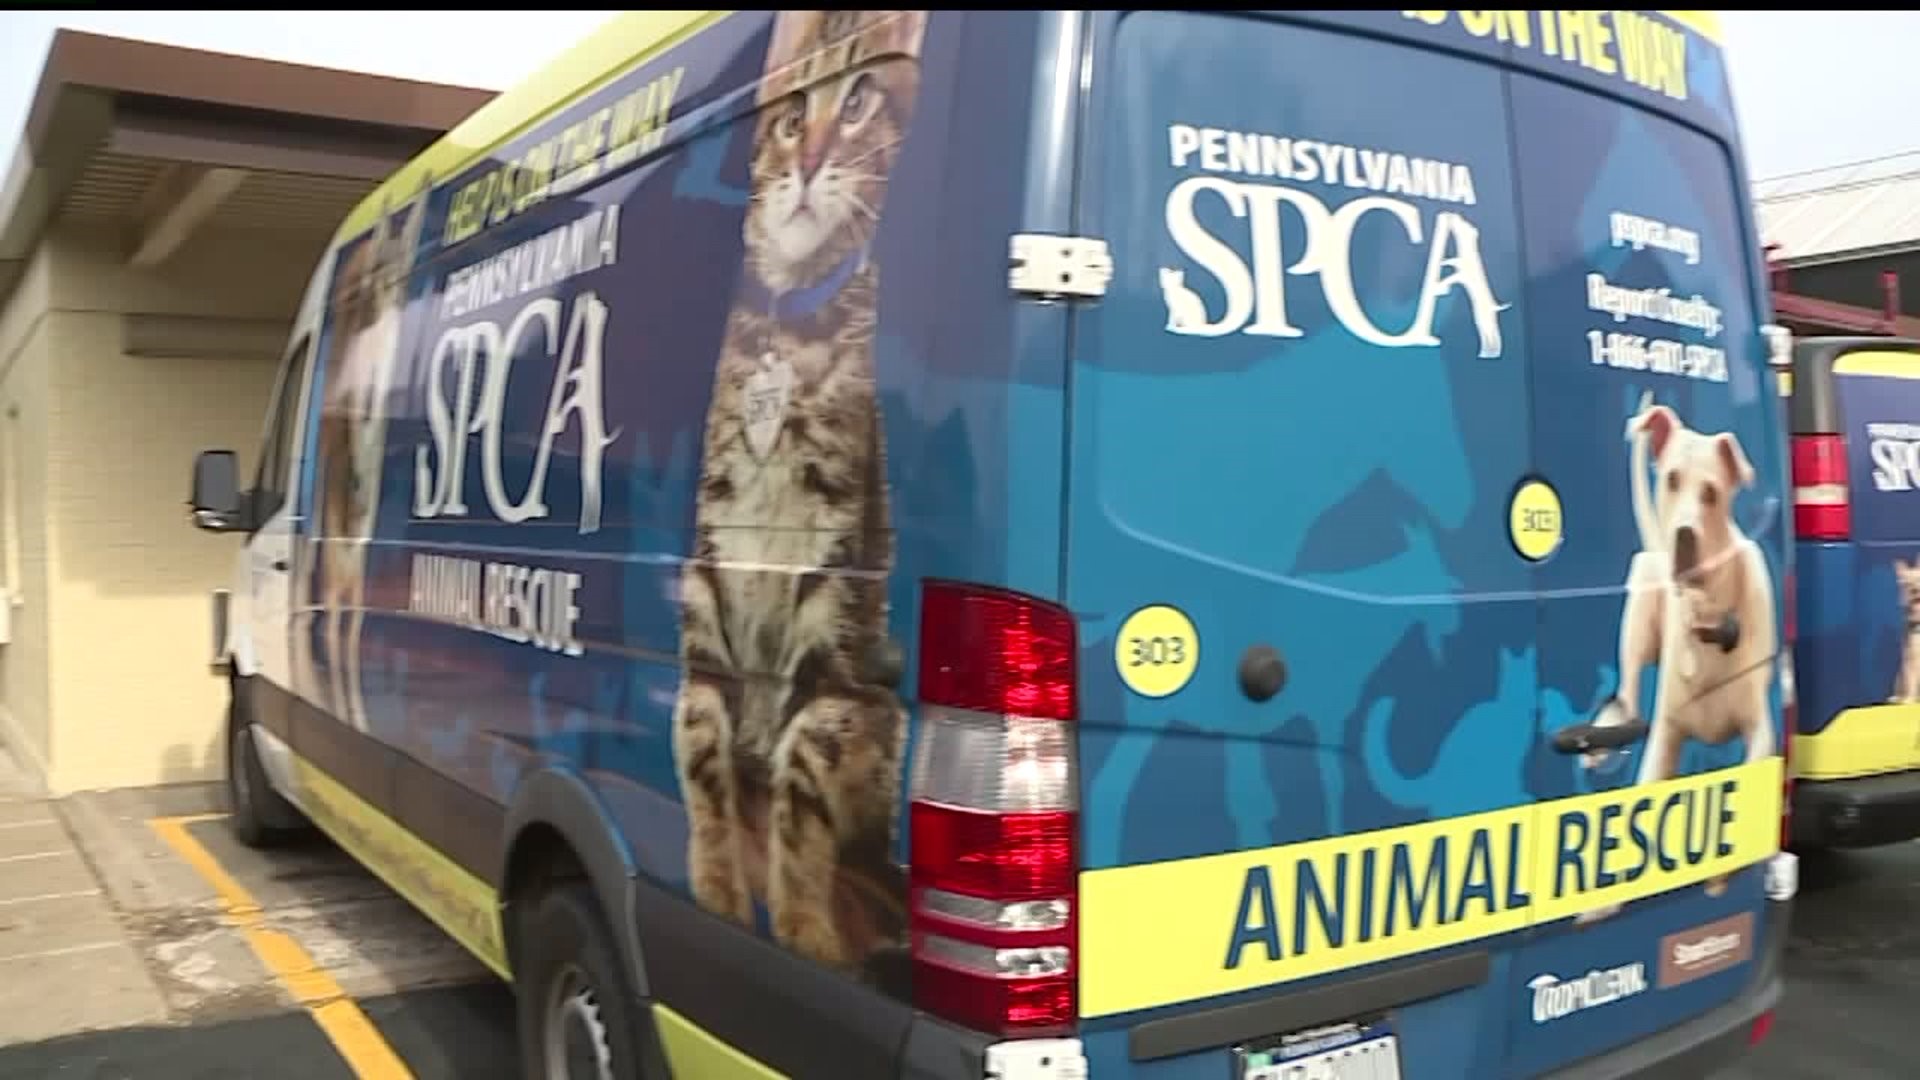 The CEO of the PSPCA calls for state funding for animal rescues and animal cruelty enforcement efforts